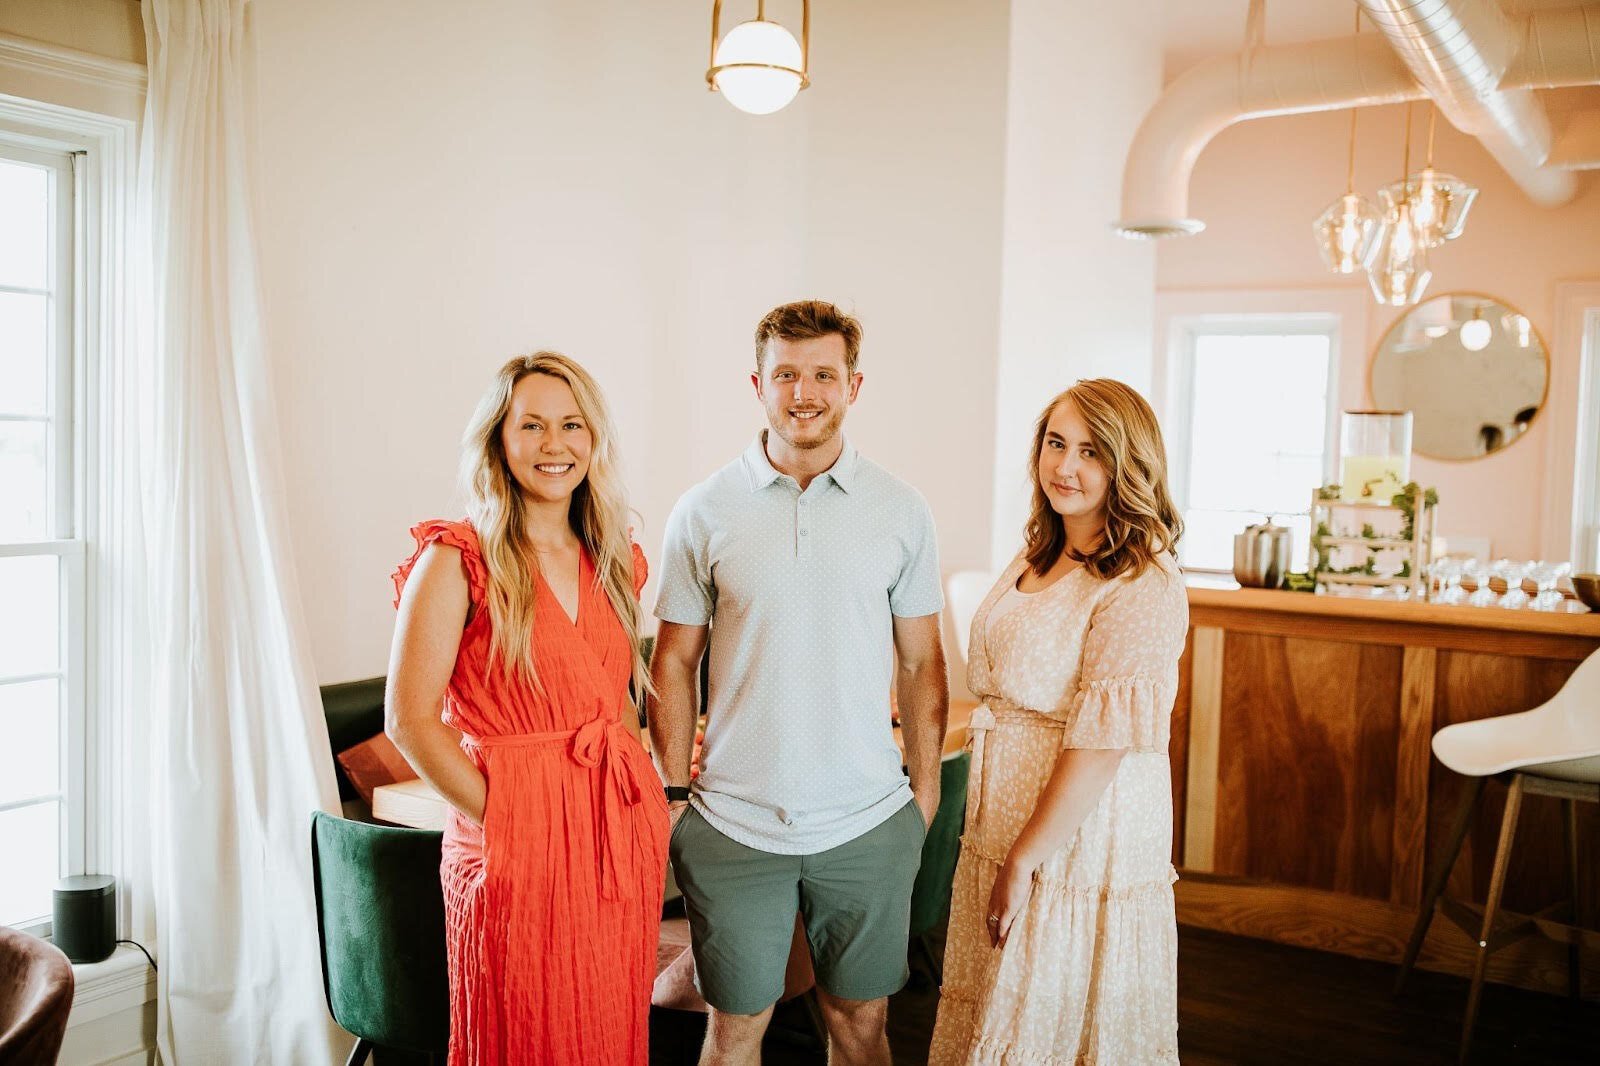 Ophelia's owners are, from left, the married couple, Paige and Taylor Tiernon, and their friend, Brittany Pape.